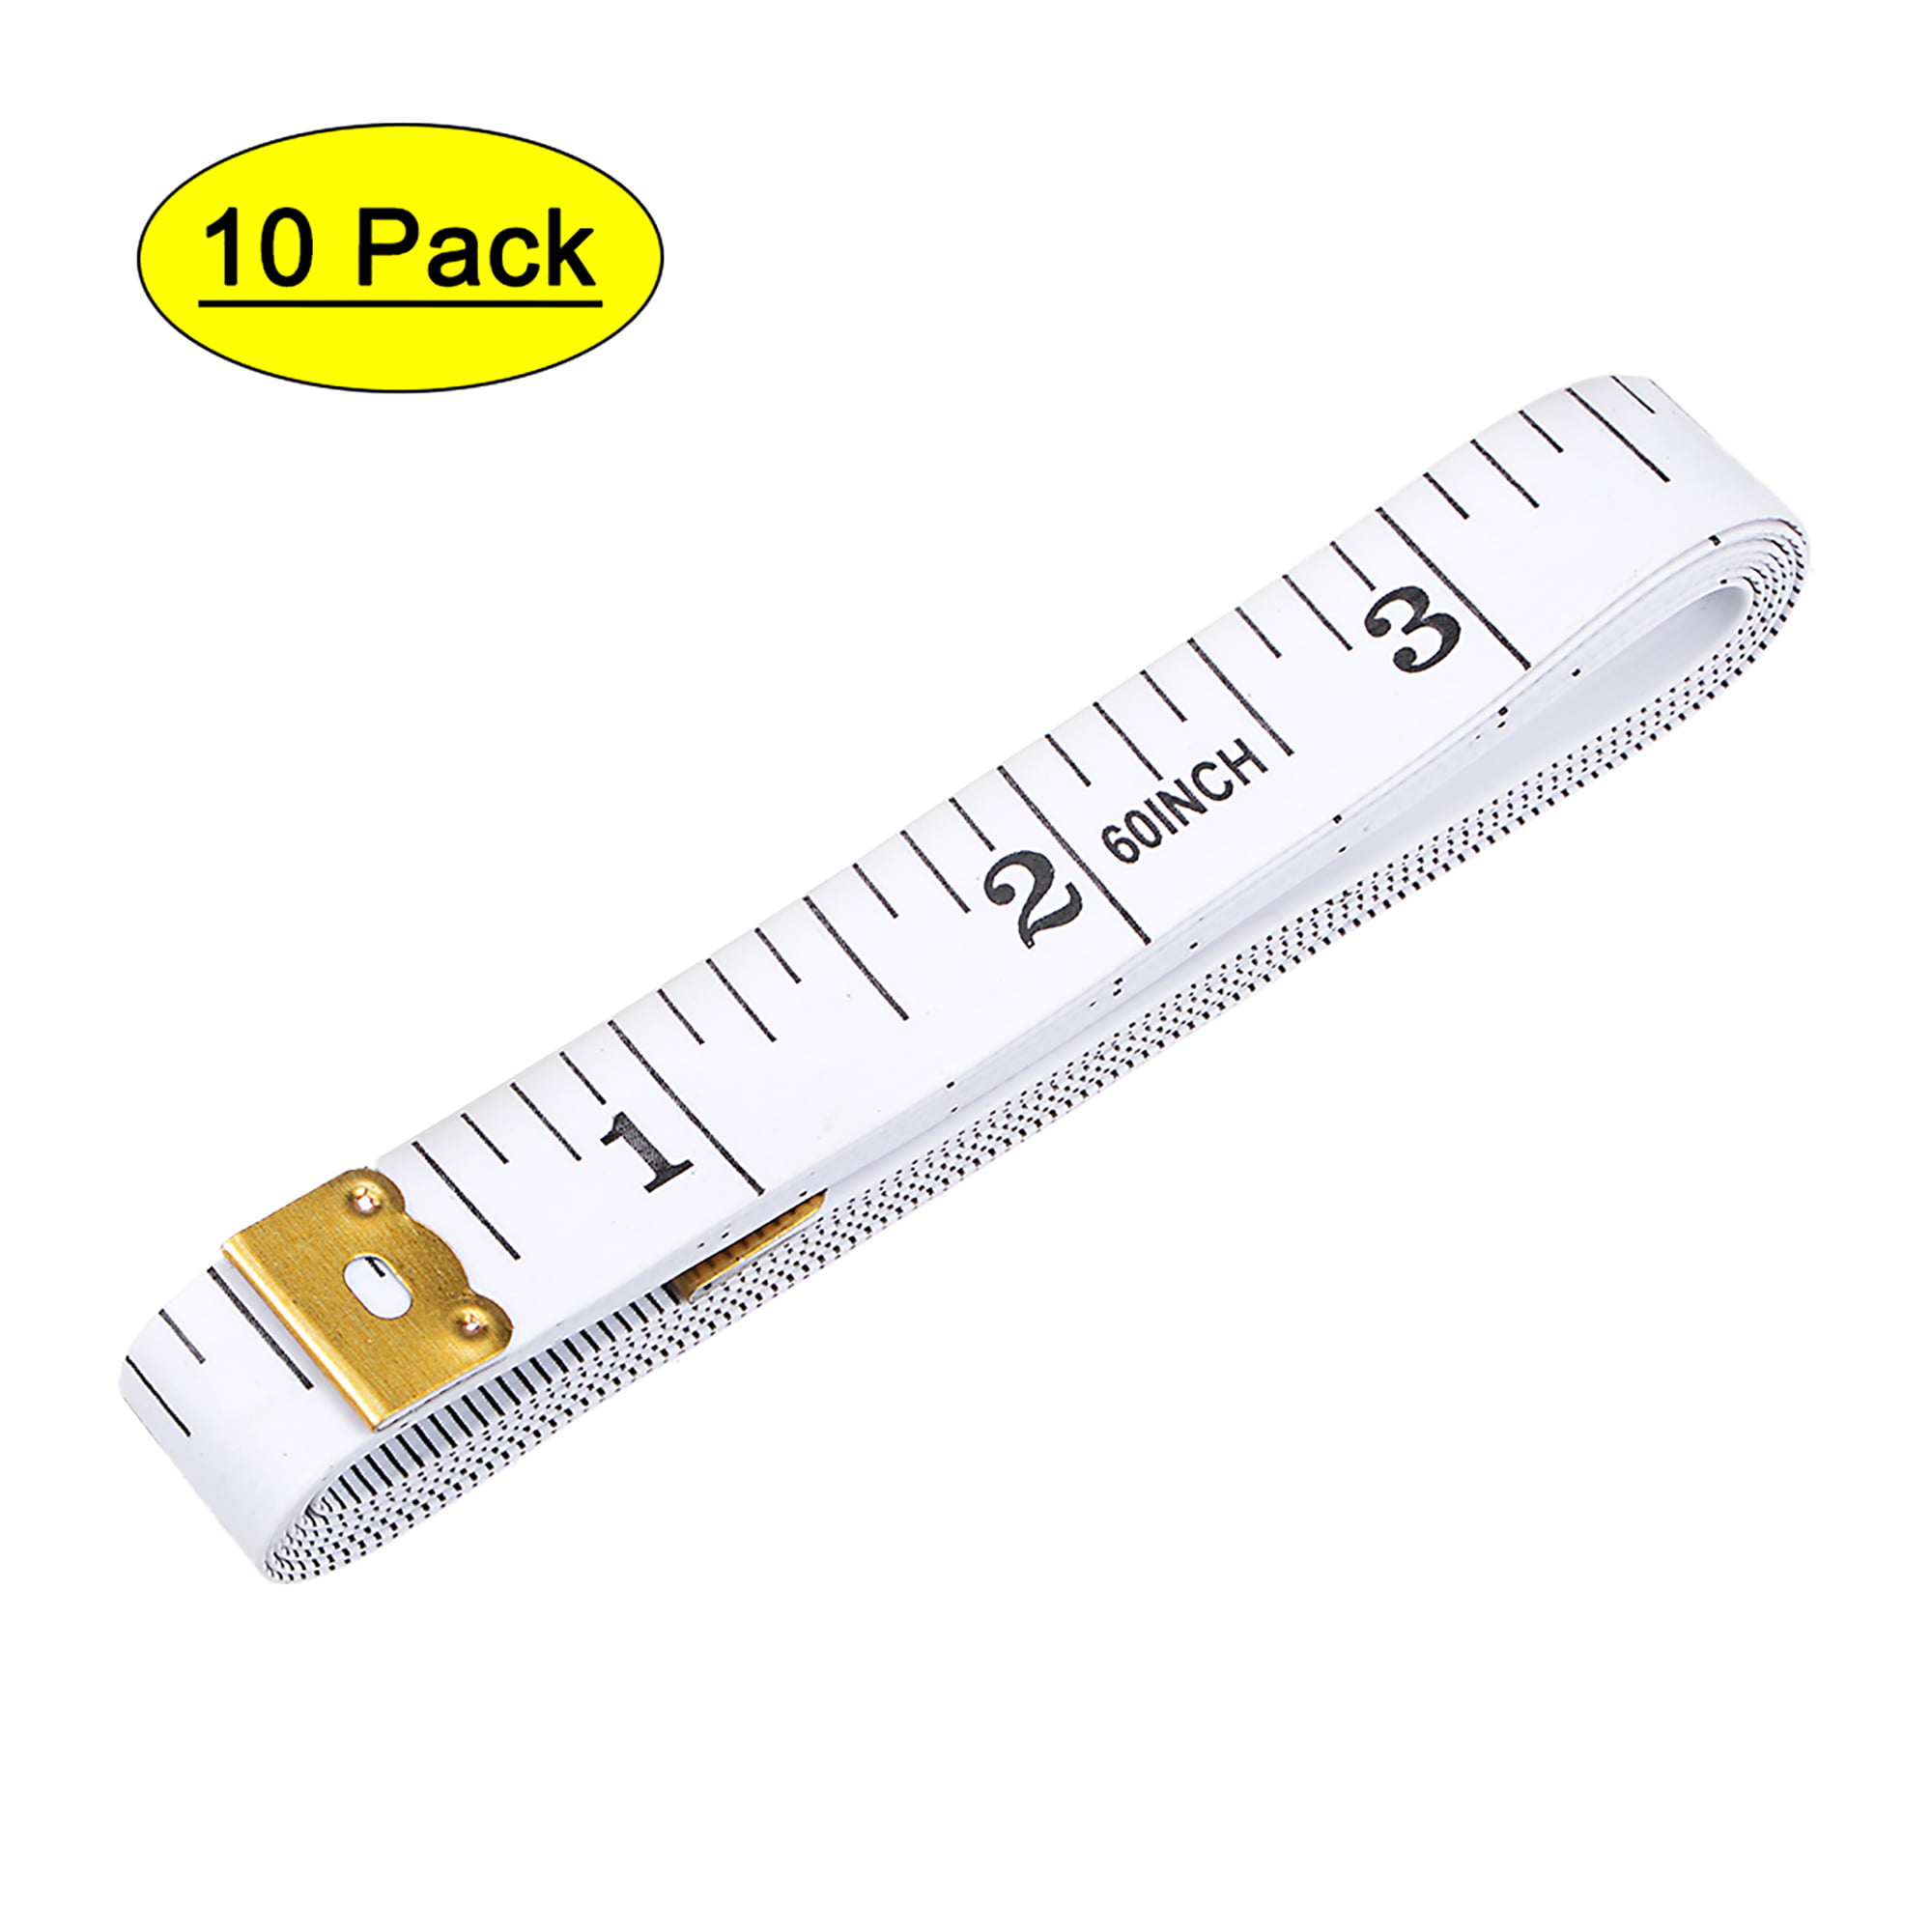 100 cm 10 PACK Measuring Tape 36' Inches Magnetic Ruler